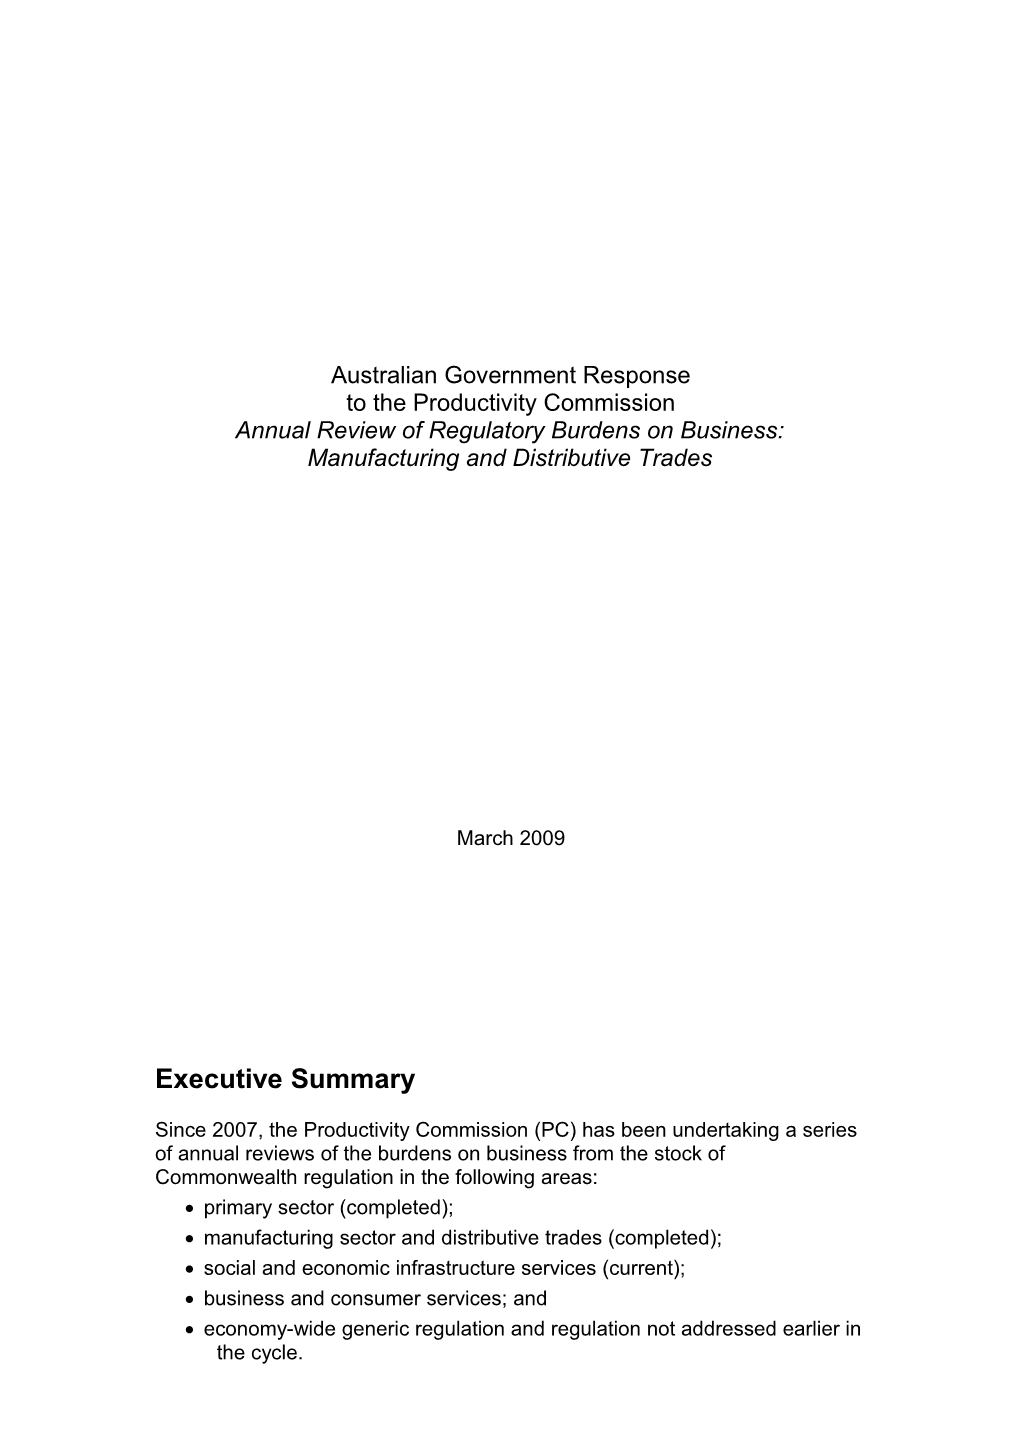 Australian Government Response to the Productivity Commission Annual Review of Regulatory